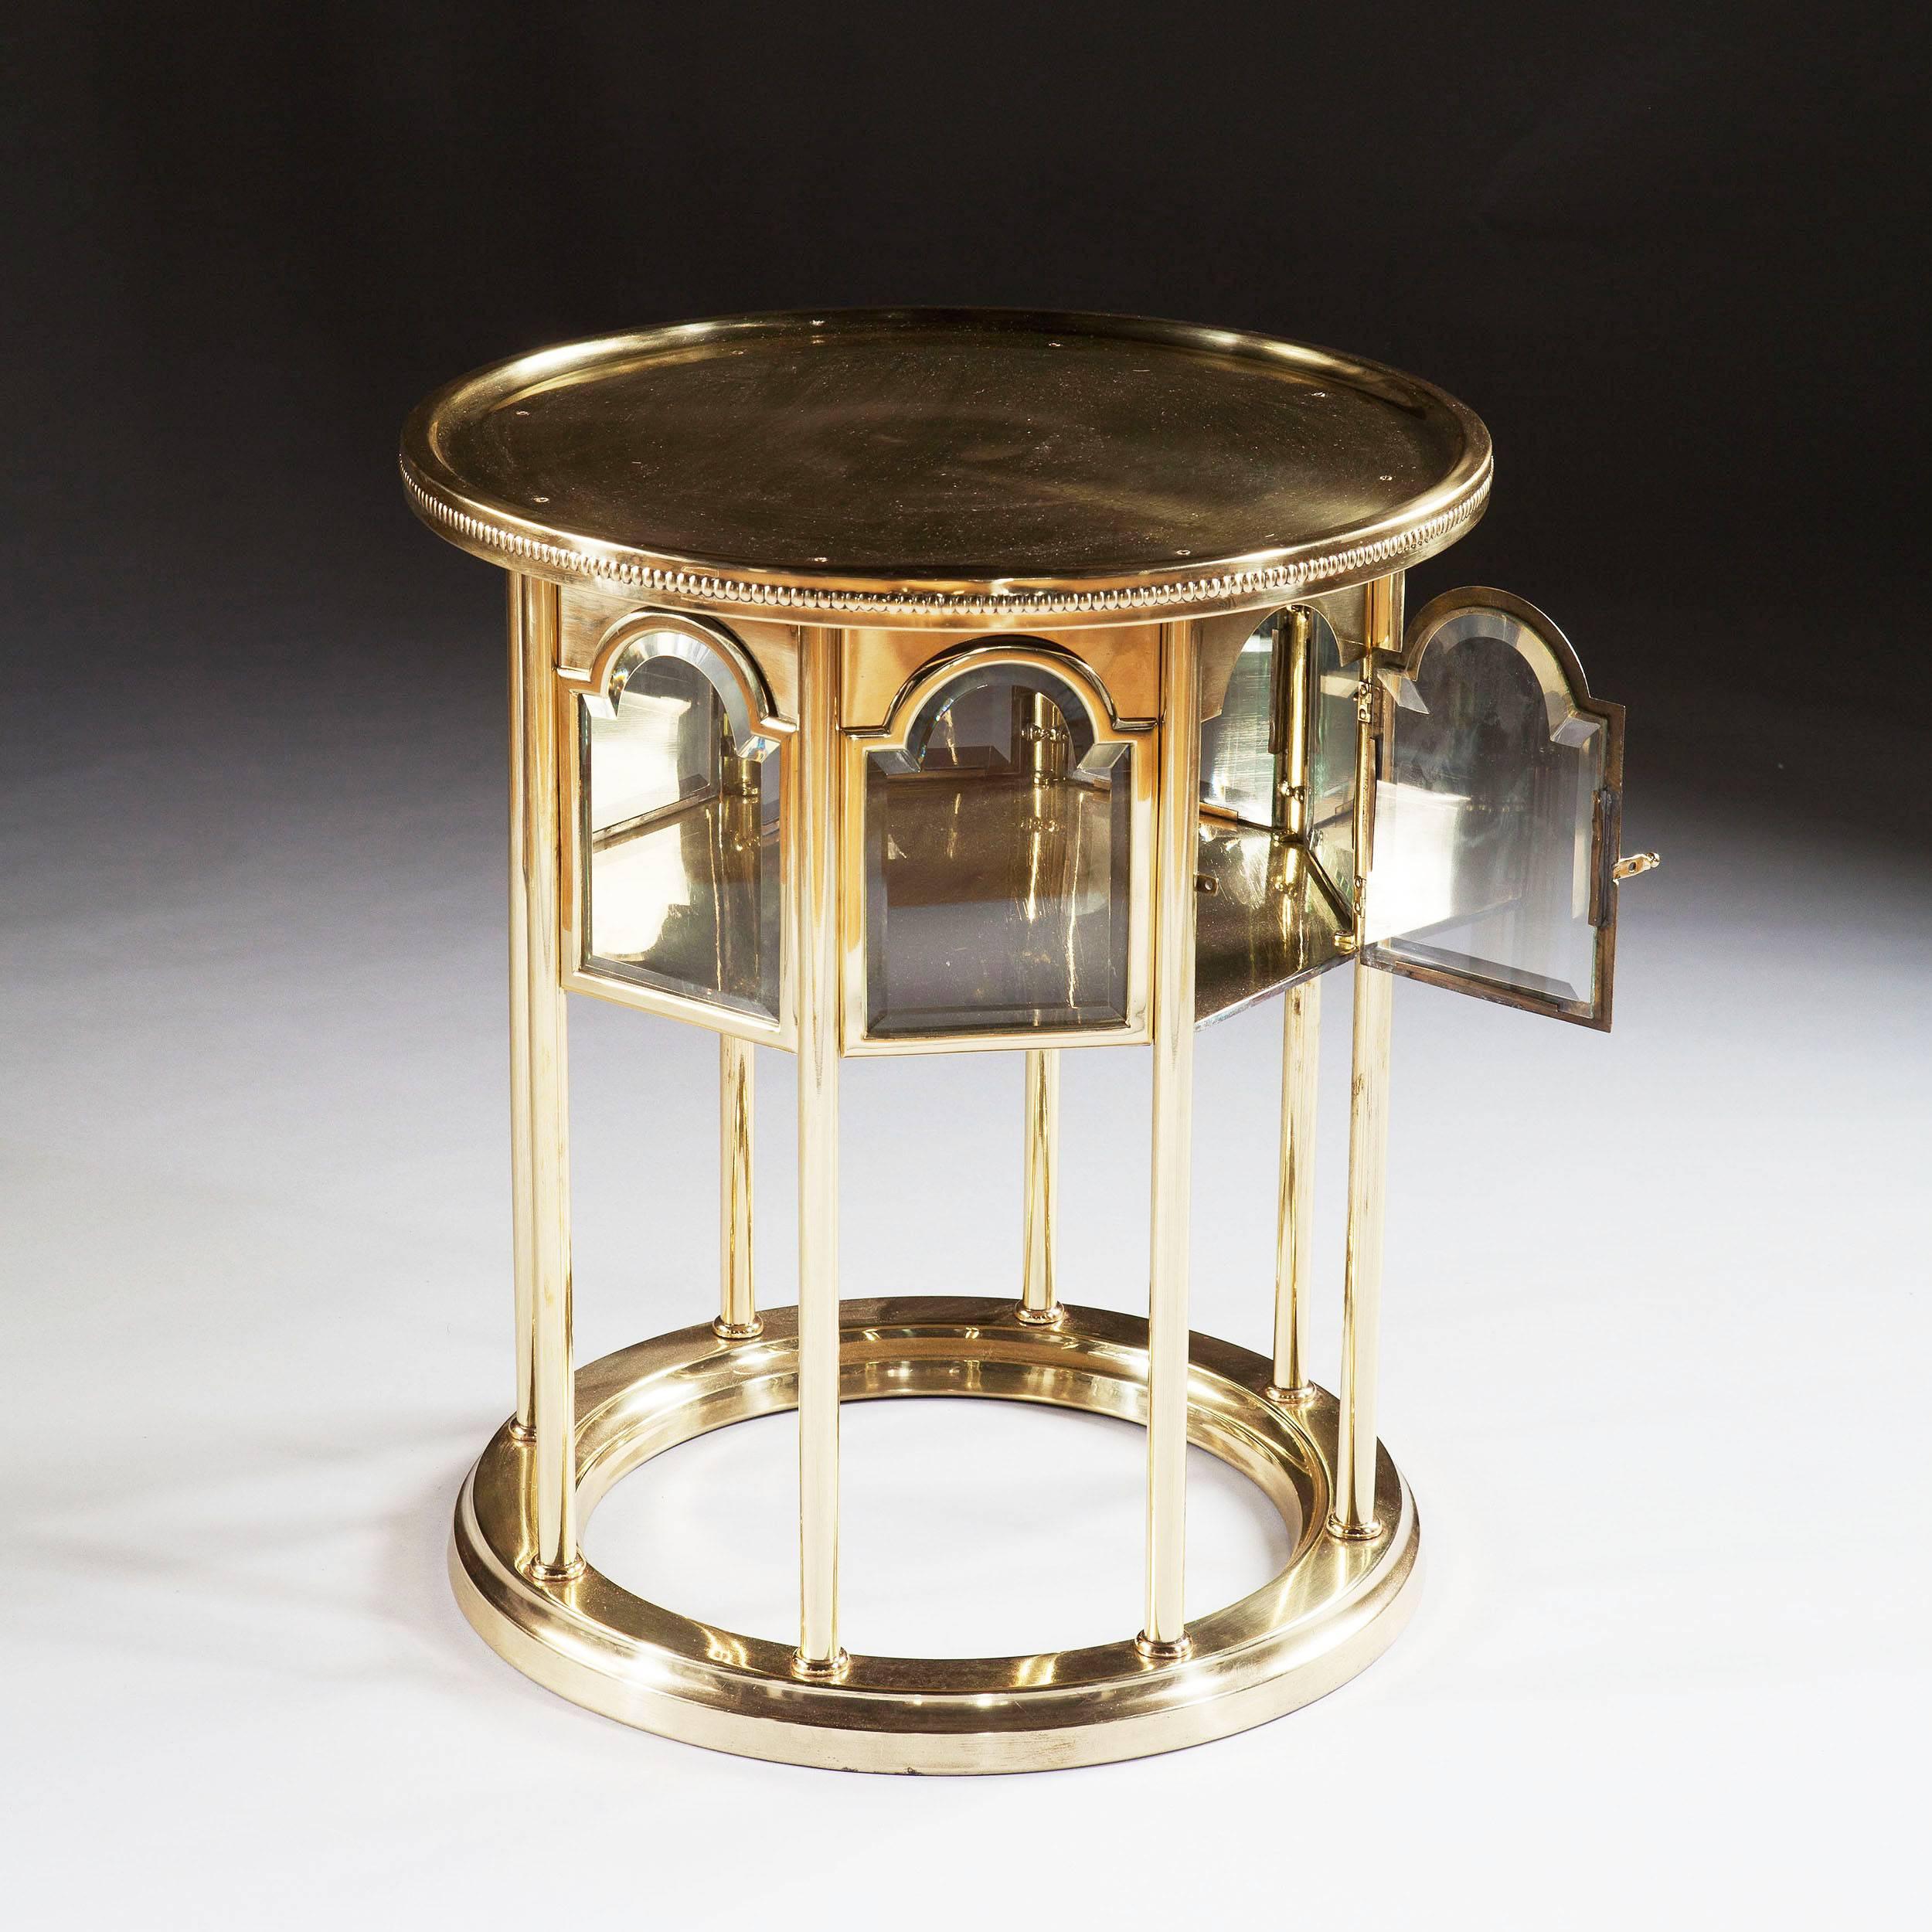 A mid-20th century hand-beaten and polished brass circular cocktail table with a reeded edge to the top above stunning glazed vitrine with a door and bevelled glass, supported on columns.
France, circa 1950

Measures: Height 24 ins (61